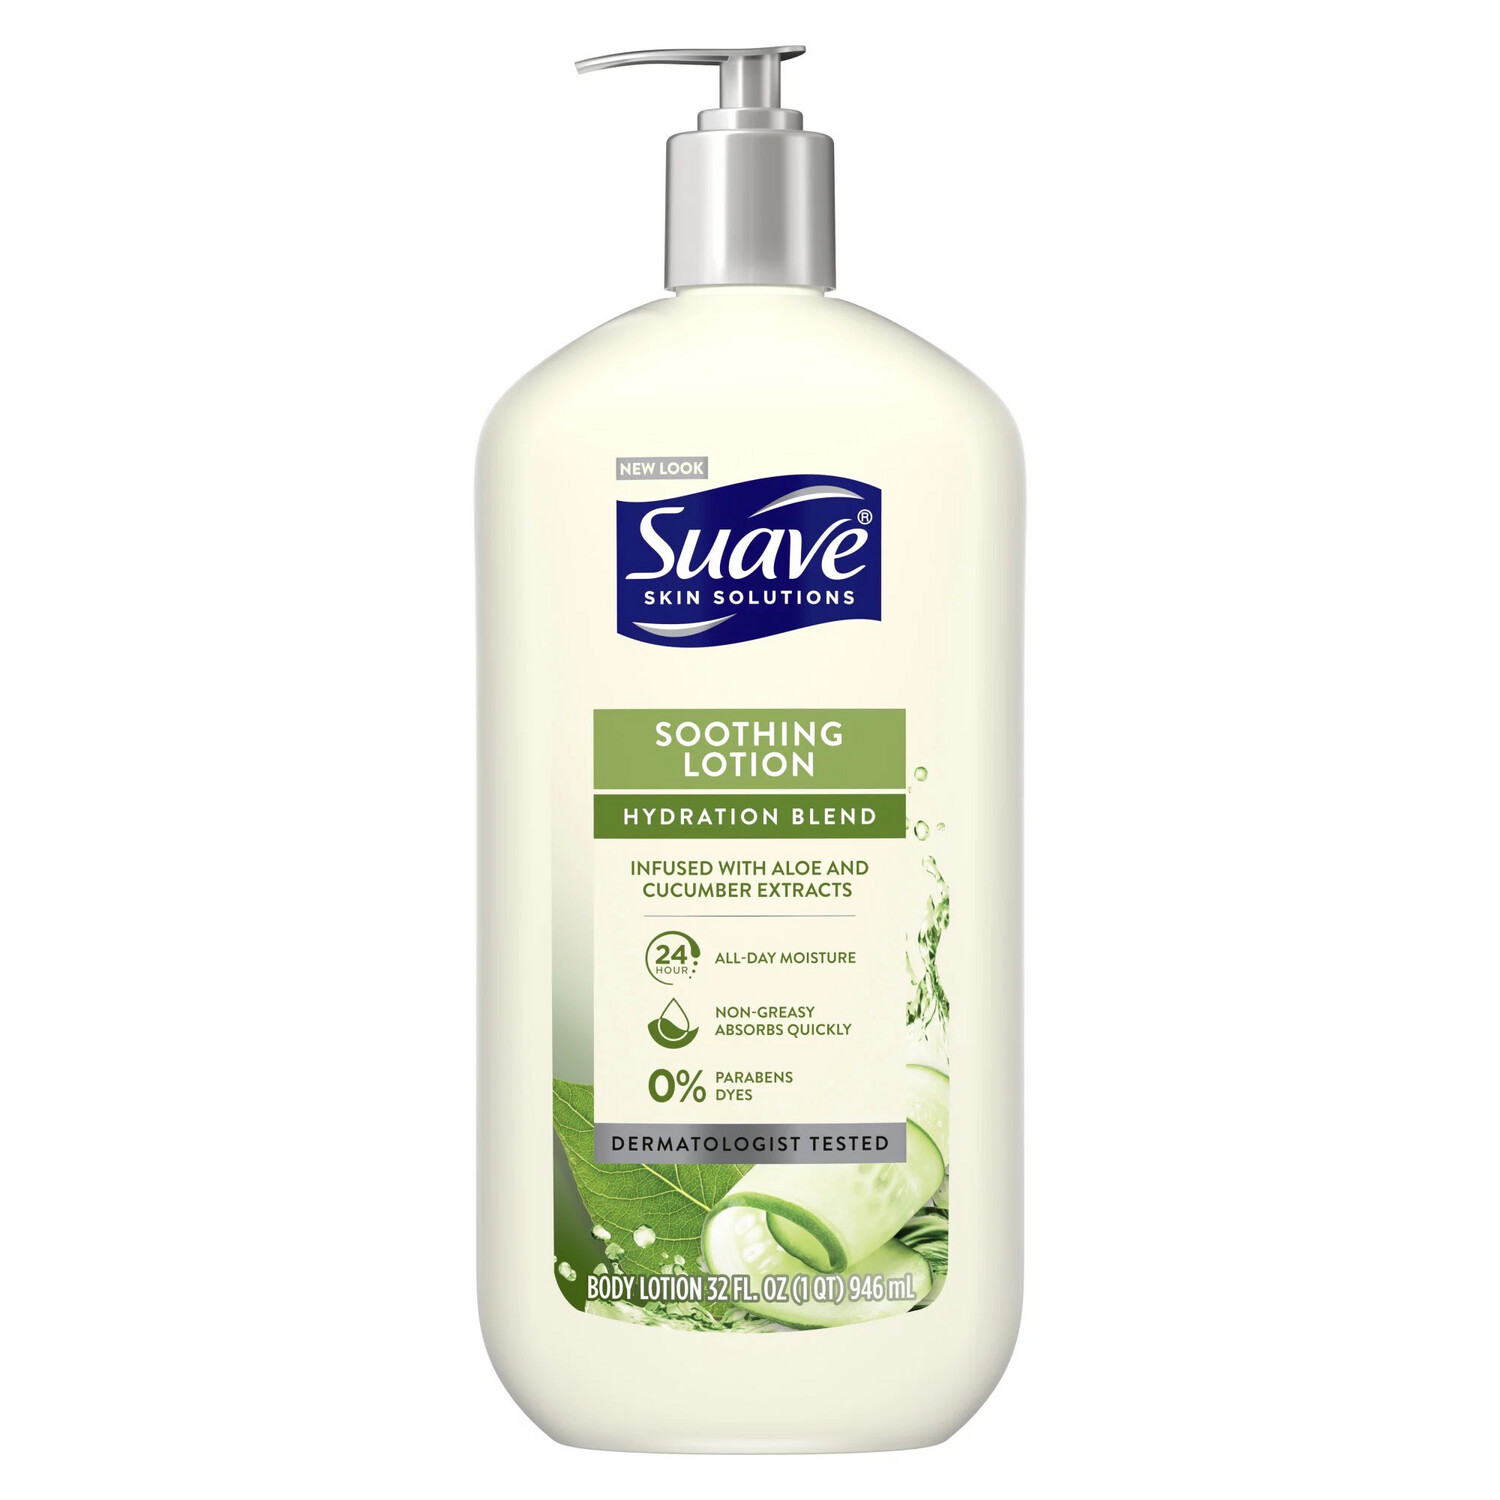 Suave Soothing Lotion Hydration Blend 32oz